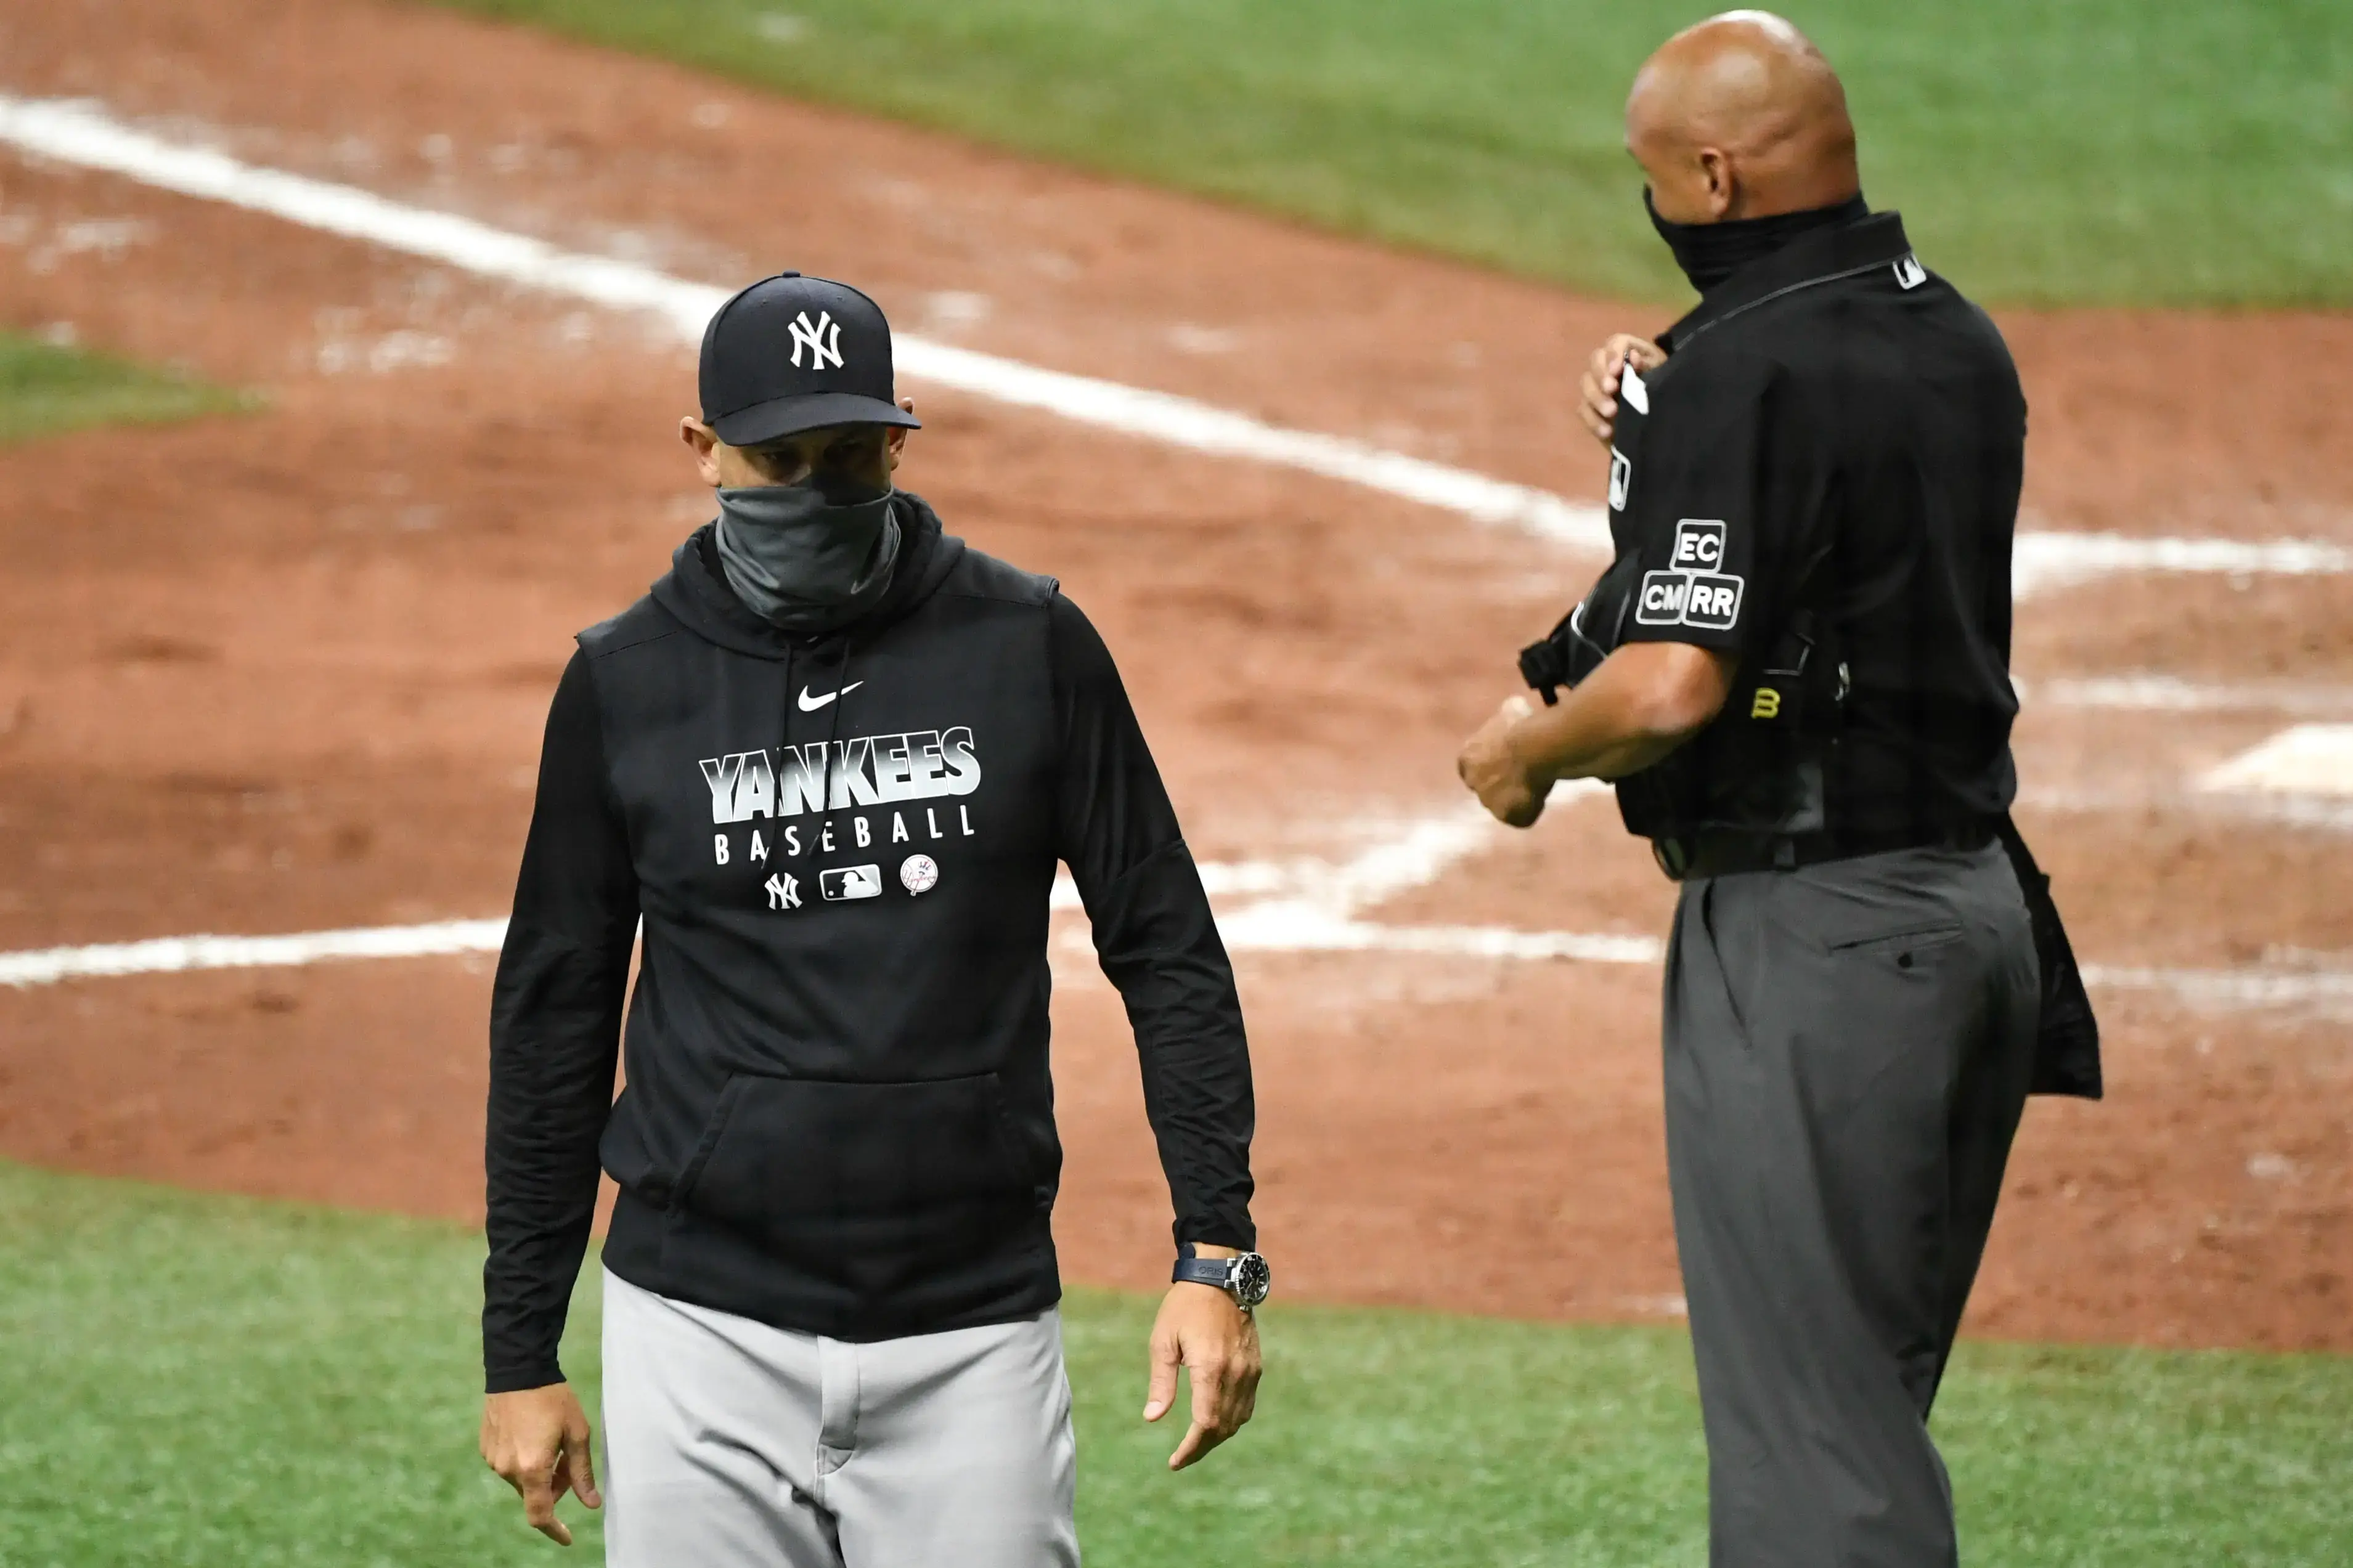 Aug 8, 2020; St. Petersburg, Florida, USA; New York Yankees manager Aaron Boone (17) walks off the field after being ejected from the game by umpire Vic Carapazza (19) during the fifth inning against the Tampa Bay Rays at Tropicana Field. Mandatory Credit: Douglas DeFelice-USA TODAY Sports / USA TODAY